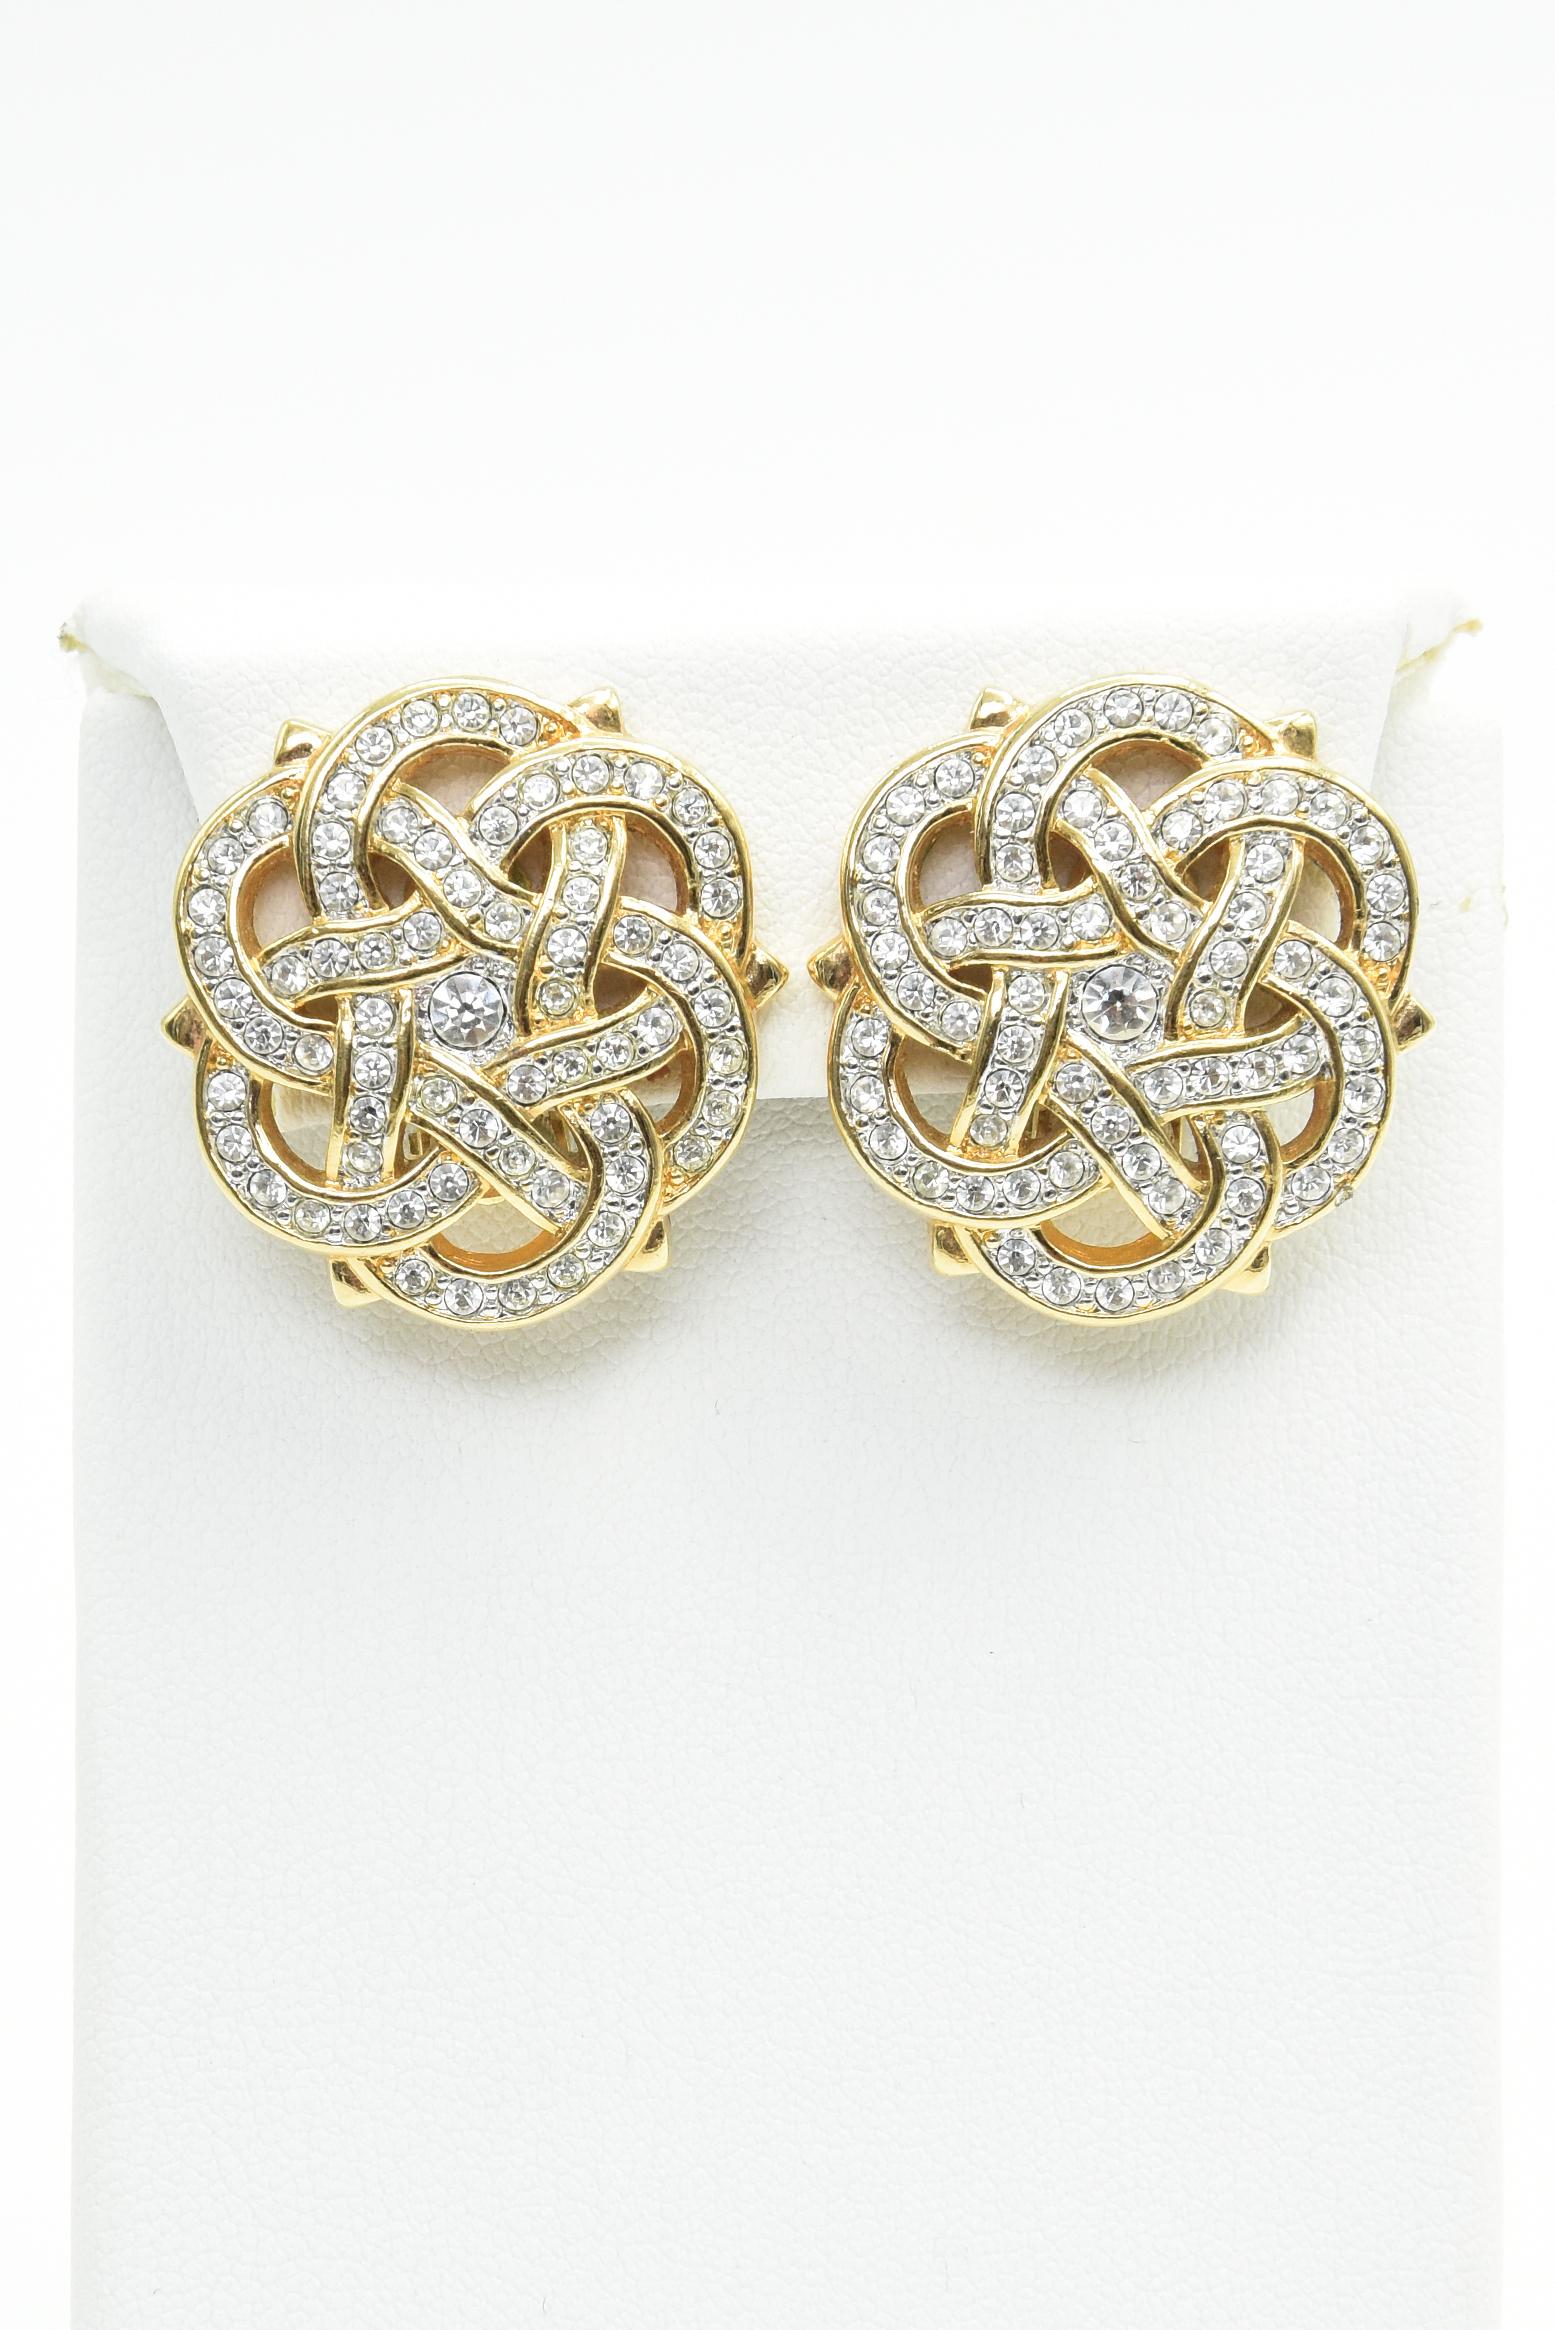 Authentic vintage Swarovski earrings featuring a gold toned Celtic knot or ribbon design set with Swarovski crystals.  Stunning earrings that clip on for easy use.

They have the swan logo on the back where the clip clamps down.  